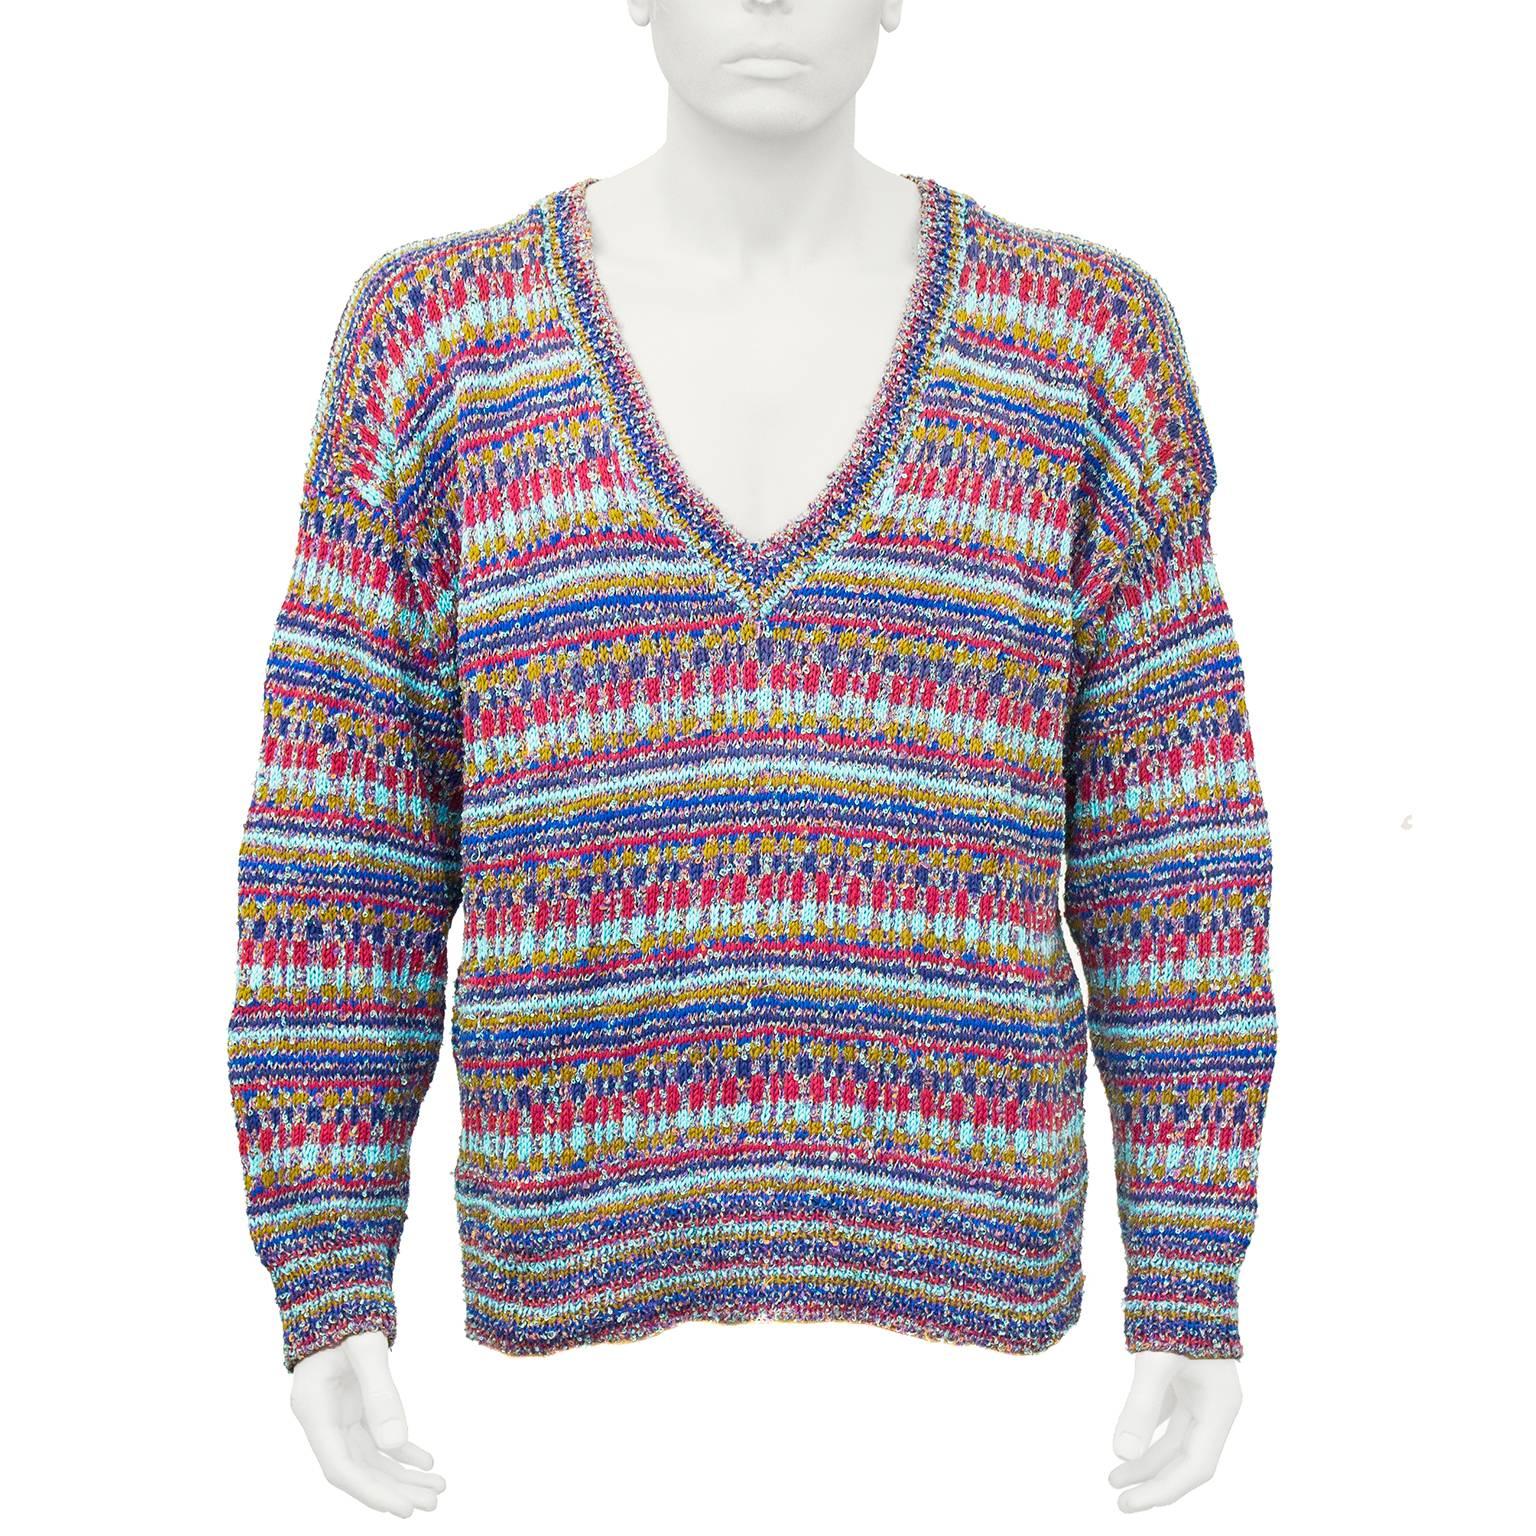 Classic vintage 1970's Missoni multi colored V-neck sweater in excellent condition. Knit in the iconic Missoni horizontal pattern combining reds, blues, turquoise and cafe coloured cotton blend yarns. Made for their mens collection but ideal for the